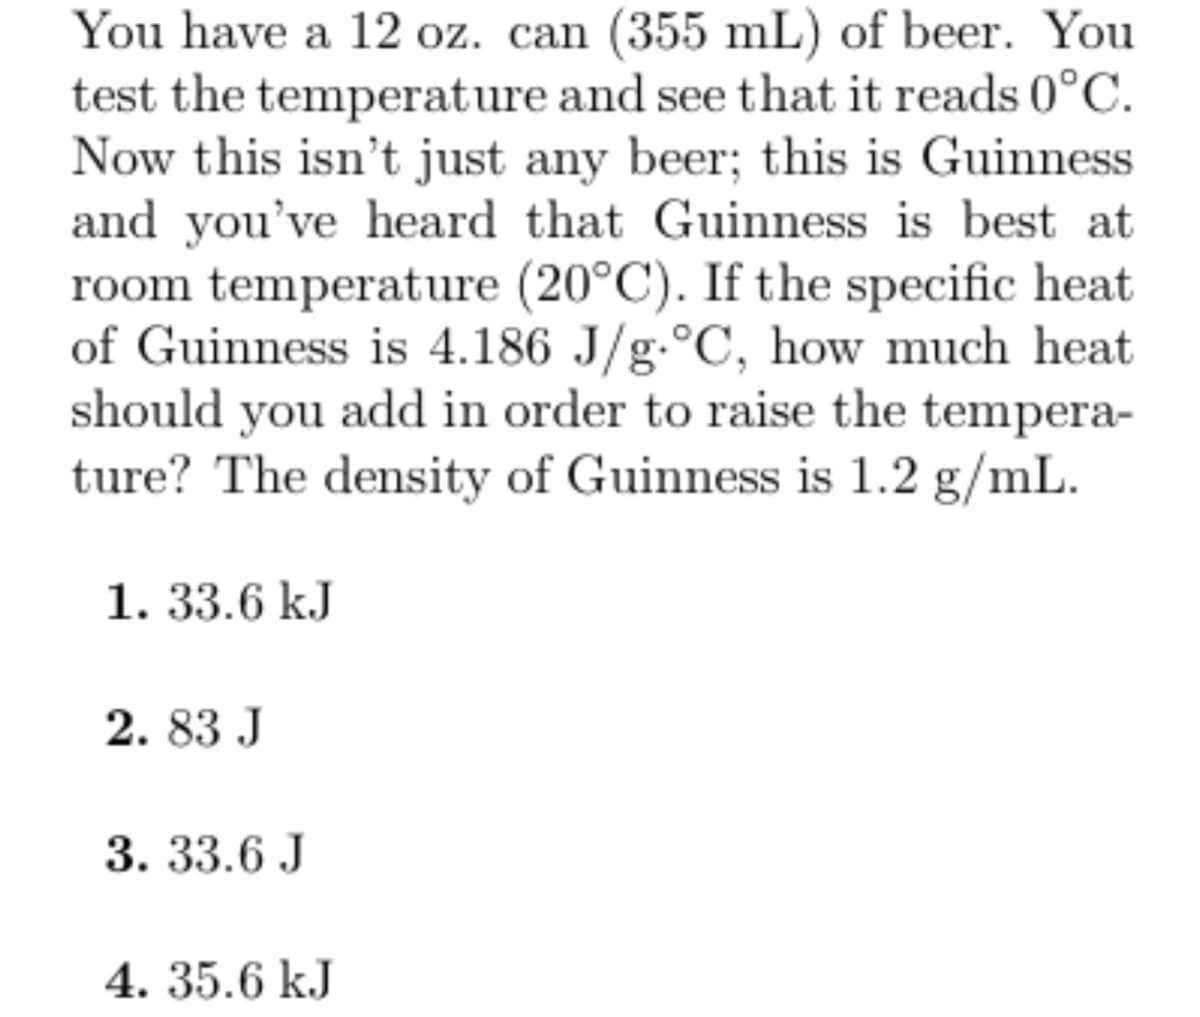 You have a 12 oz. can (355 mL) of beer. You
test the temperature and see that it reads 0°C.
Now this isn't just any beer; this is Guinness
and you've heard that Guinness is best at
room temperature (20°C). If the specific heat
of Guinness is 4.186 J/g °C, how much heat
should you add in order to raise the tempera-
ture? The density of Guinness is 1.2 g/mL.
1. 33.6 kJ
2.83 J
3. 33.6 J
4. 35.6 kJ